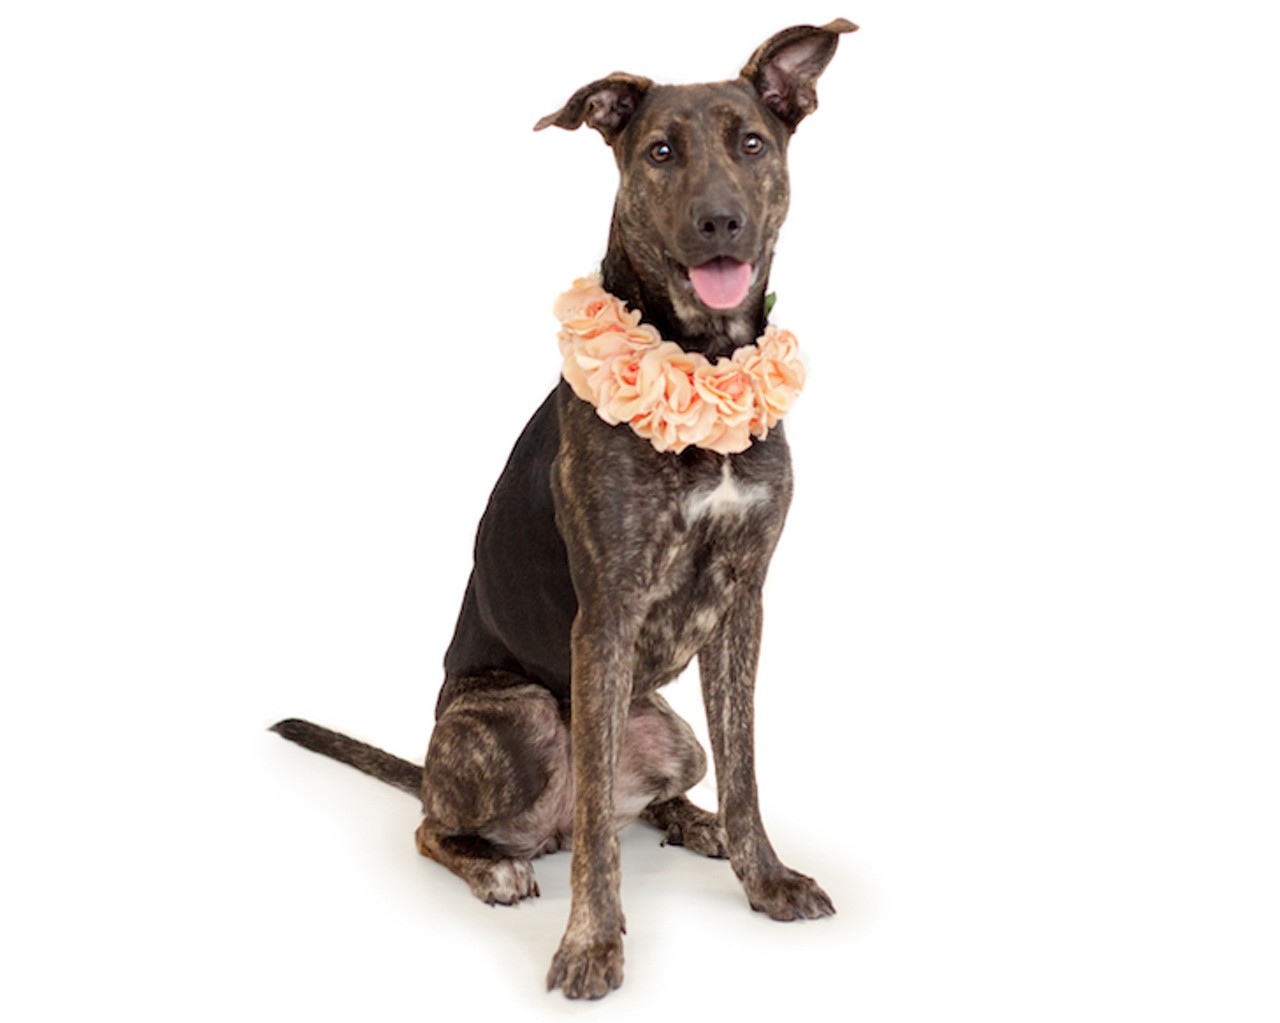 22 adoptable Orange County dogs looking for a new home ASAP